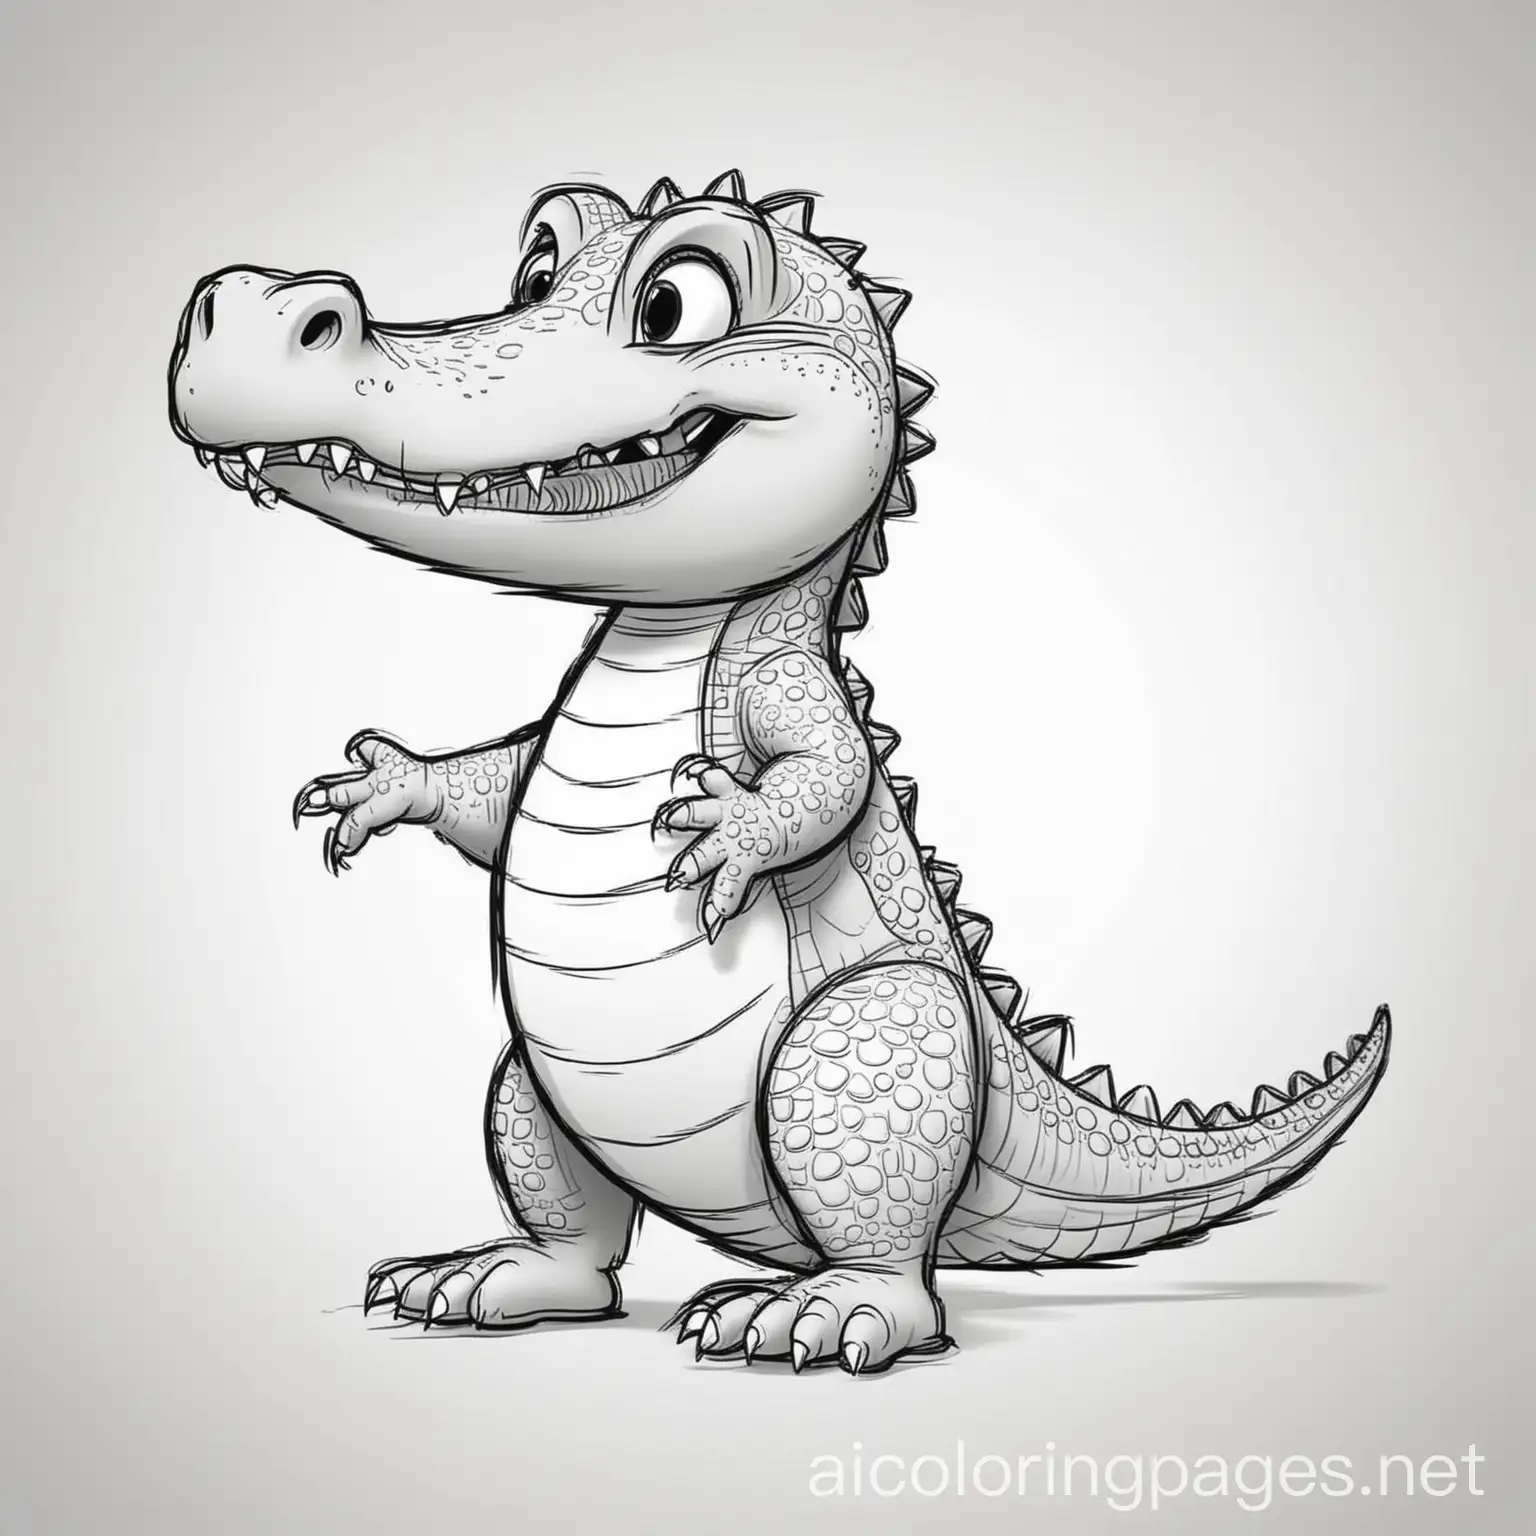 Alligator cartoon character, Coloring Page, black and white, line art, white background, Simplicity, Ample White Space. The background of the coloring page is plain white to make it easy for young children to color within the lines. The outlines of all the subjects are easy to distinguish, making it simple for kids to color without too much difficulty